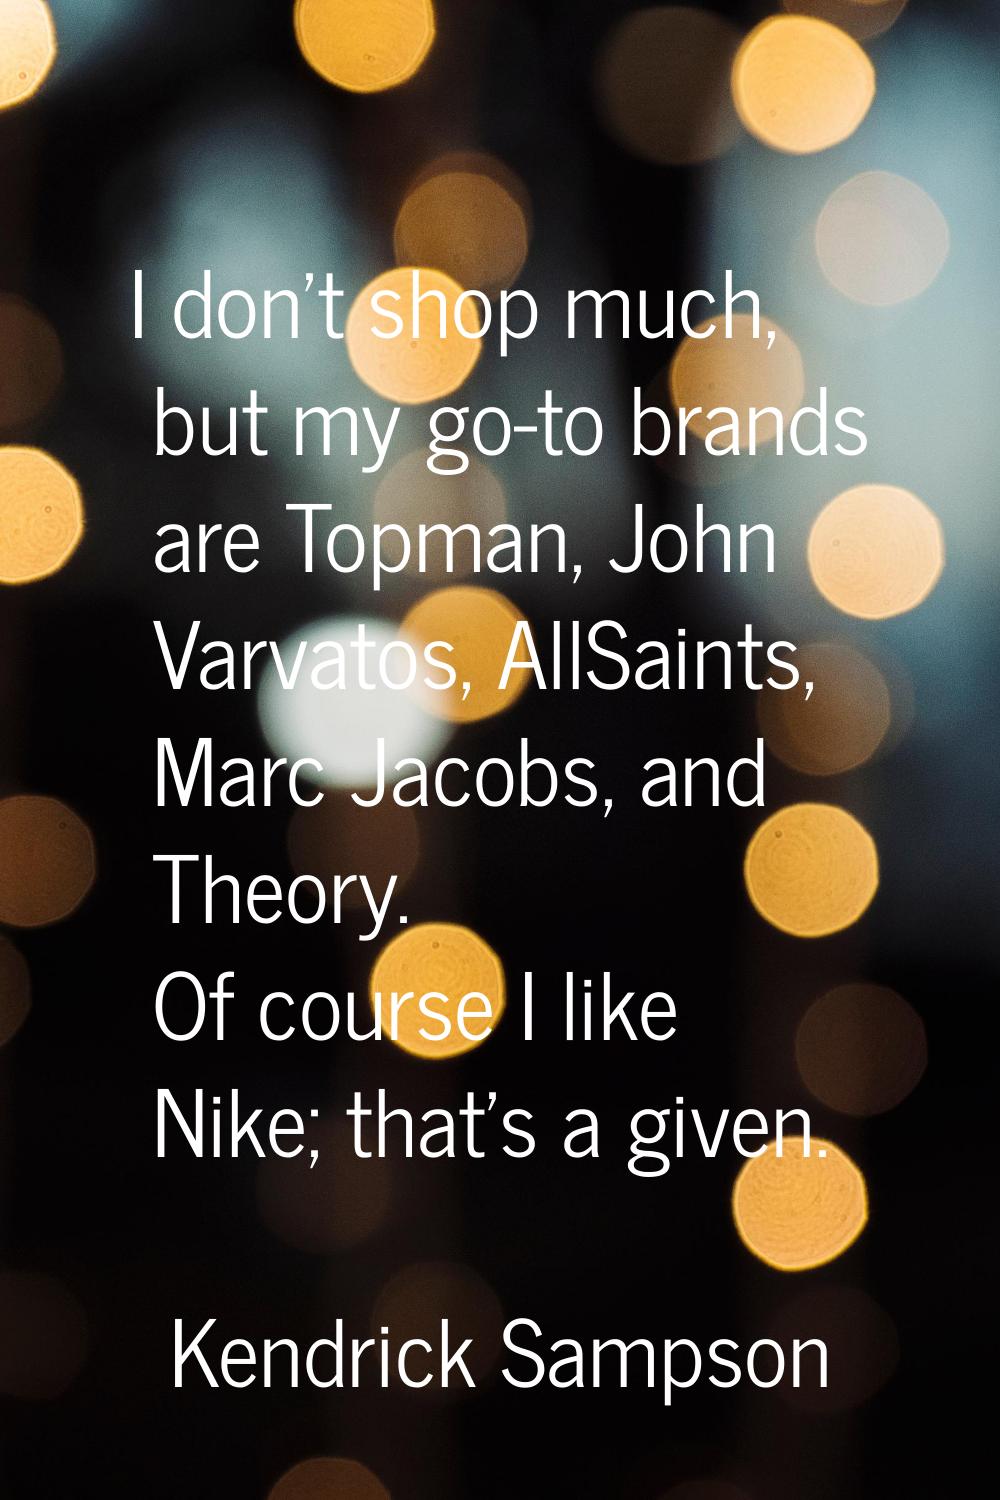 I don't shop much, but my go-to brands are Topman, John Varvatos, AllSaints, Marc Jacobs, and Theor